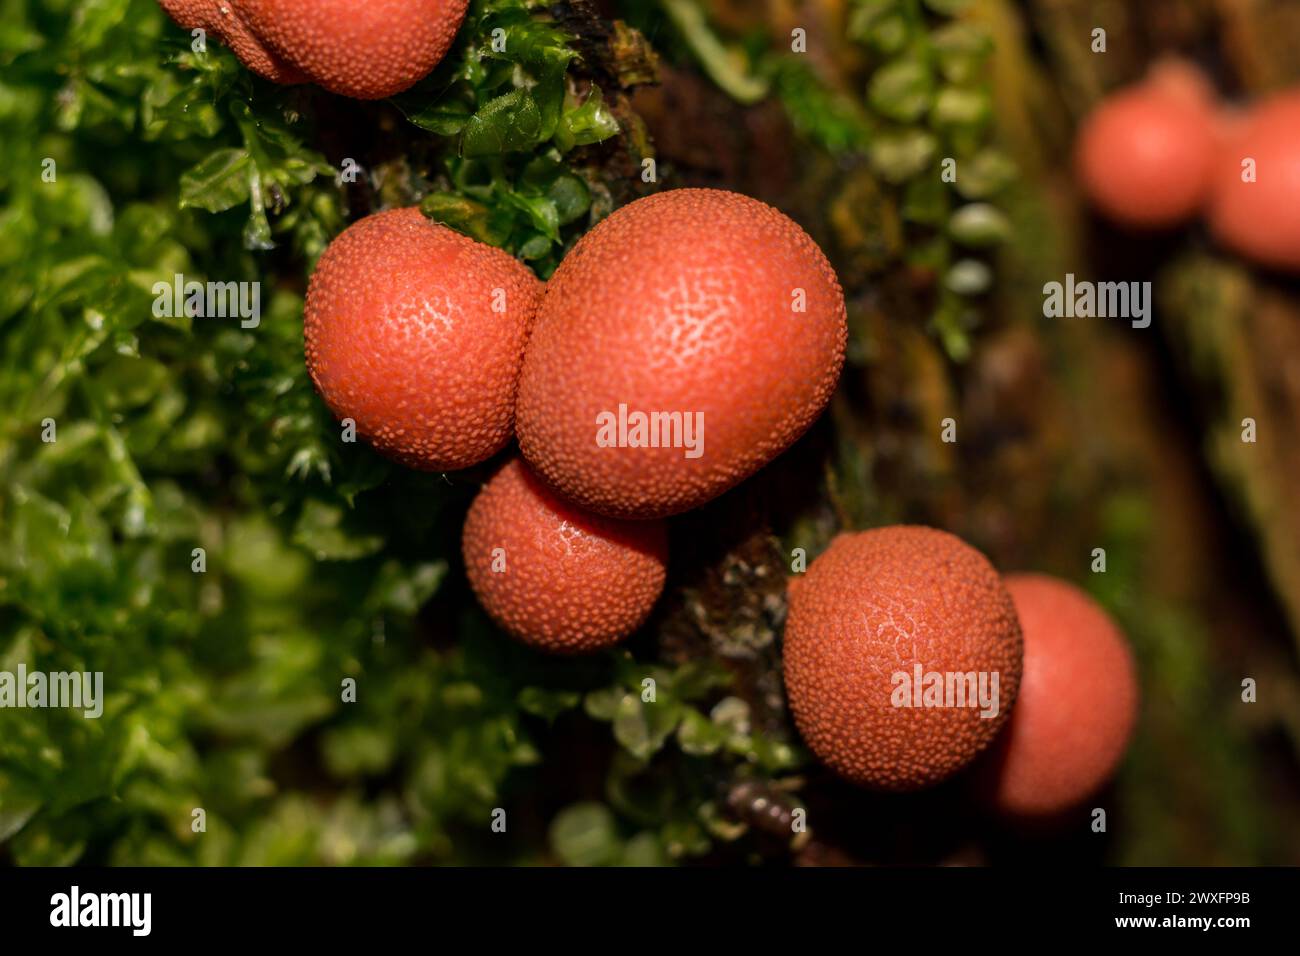 Lycogala epidendrum (wolf's milk, groening's slime) - A type of mold that lives on rotten stumps Stock Photo